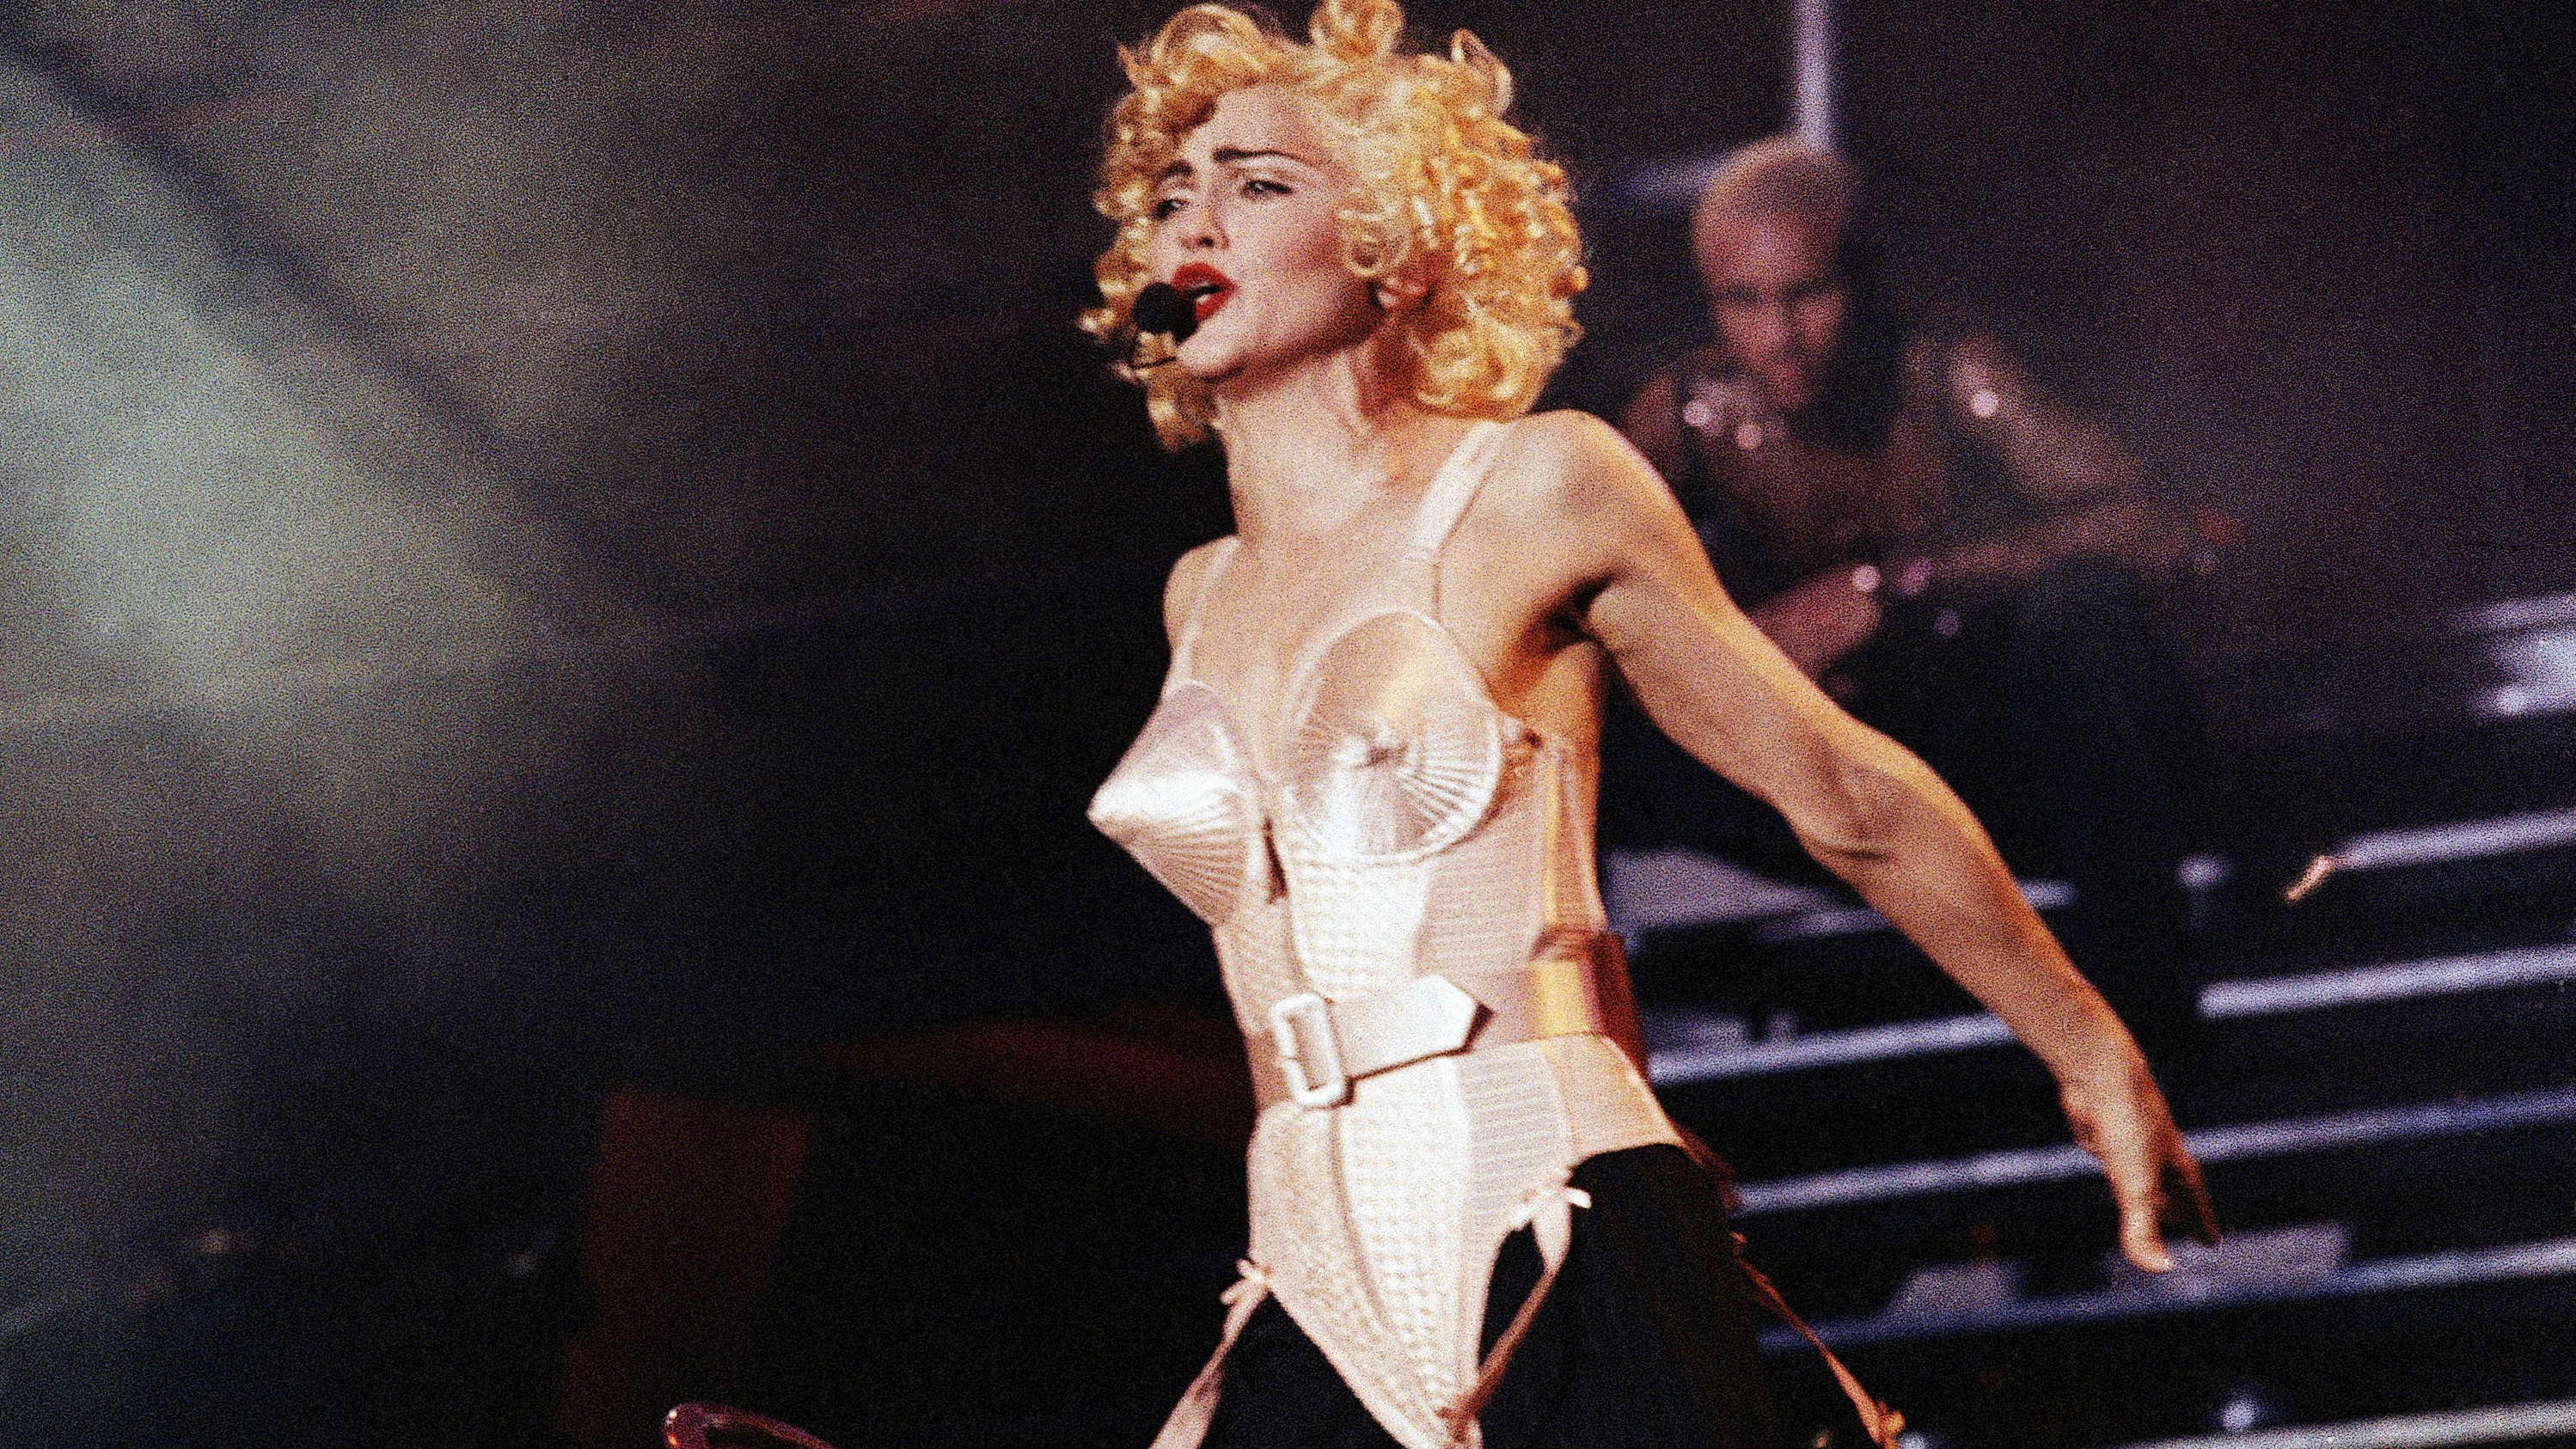 Pop star Madonna goes into a frenzy before a full Vicente Calderon Stadium in Madrid on July 27, 1990 during the first of three performances in Spain. (AP Photo/Jimmy Rubio)